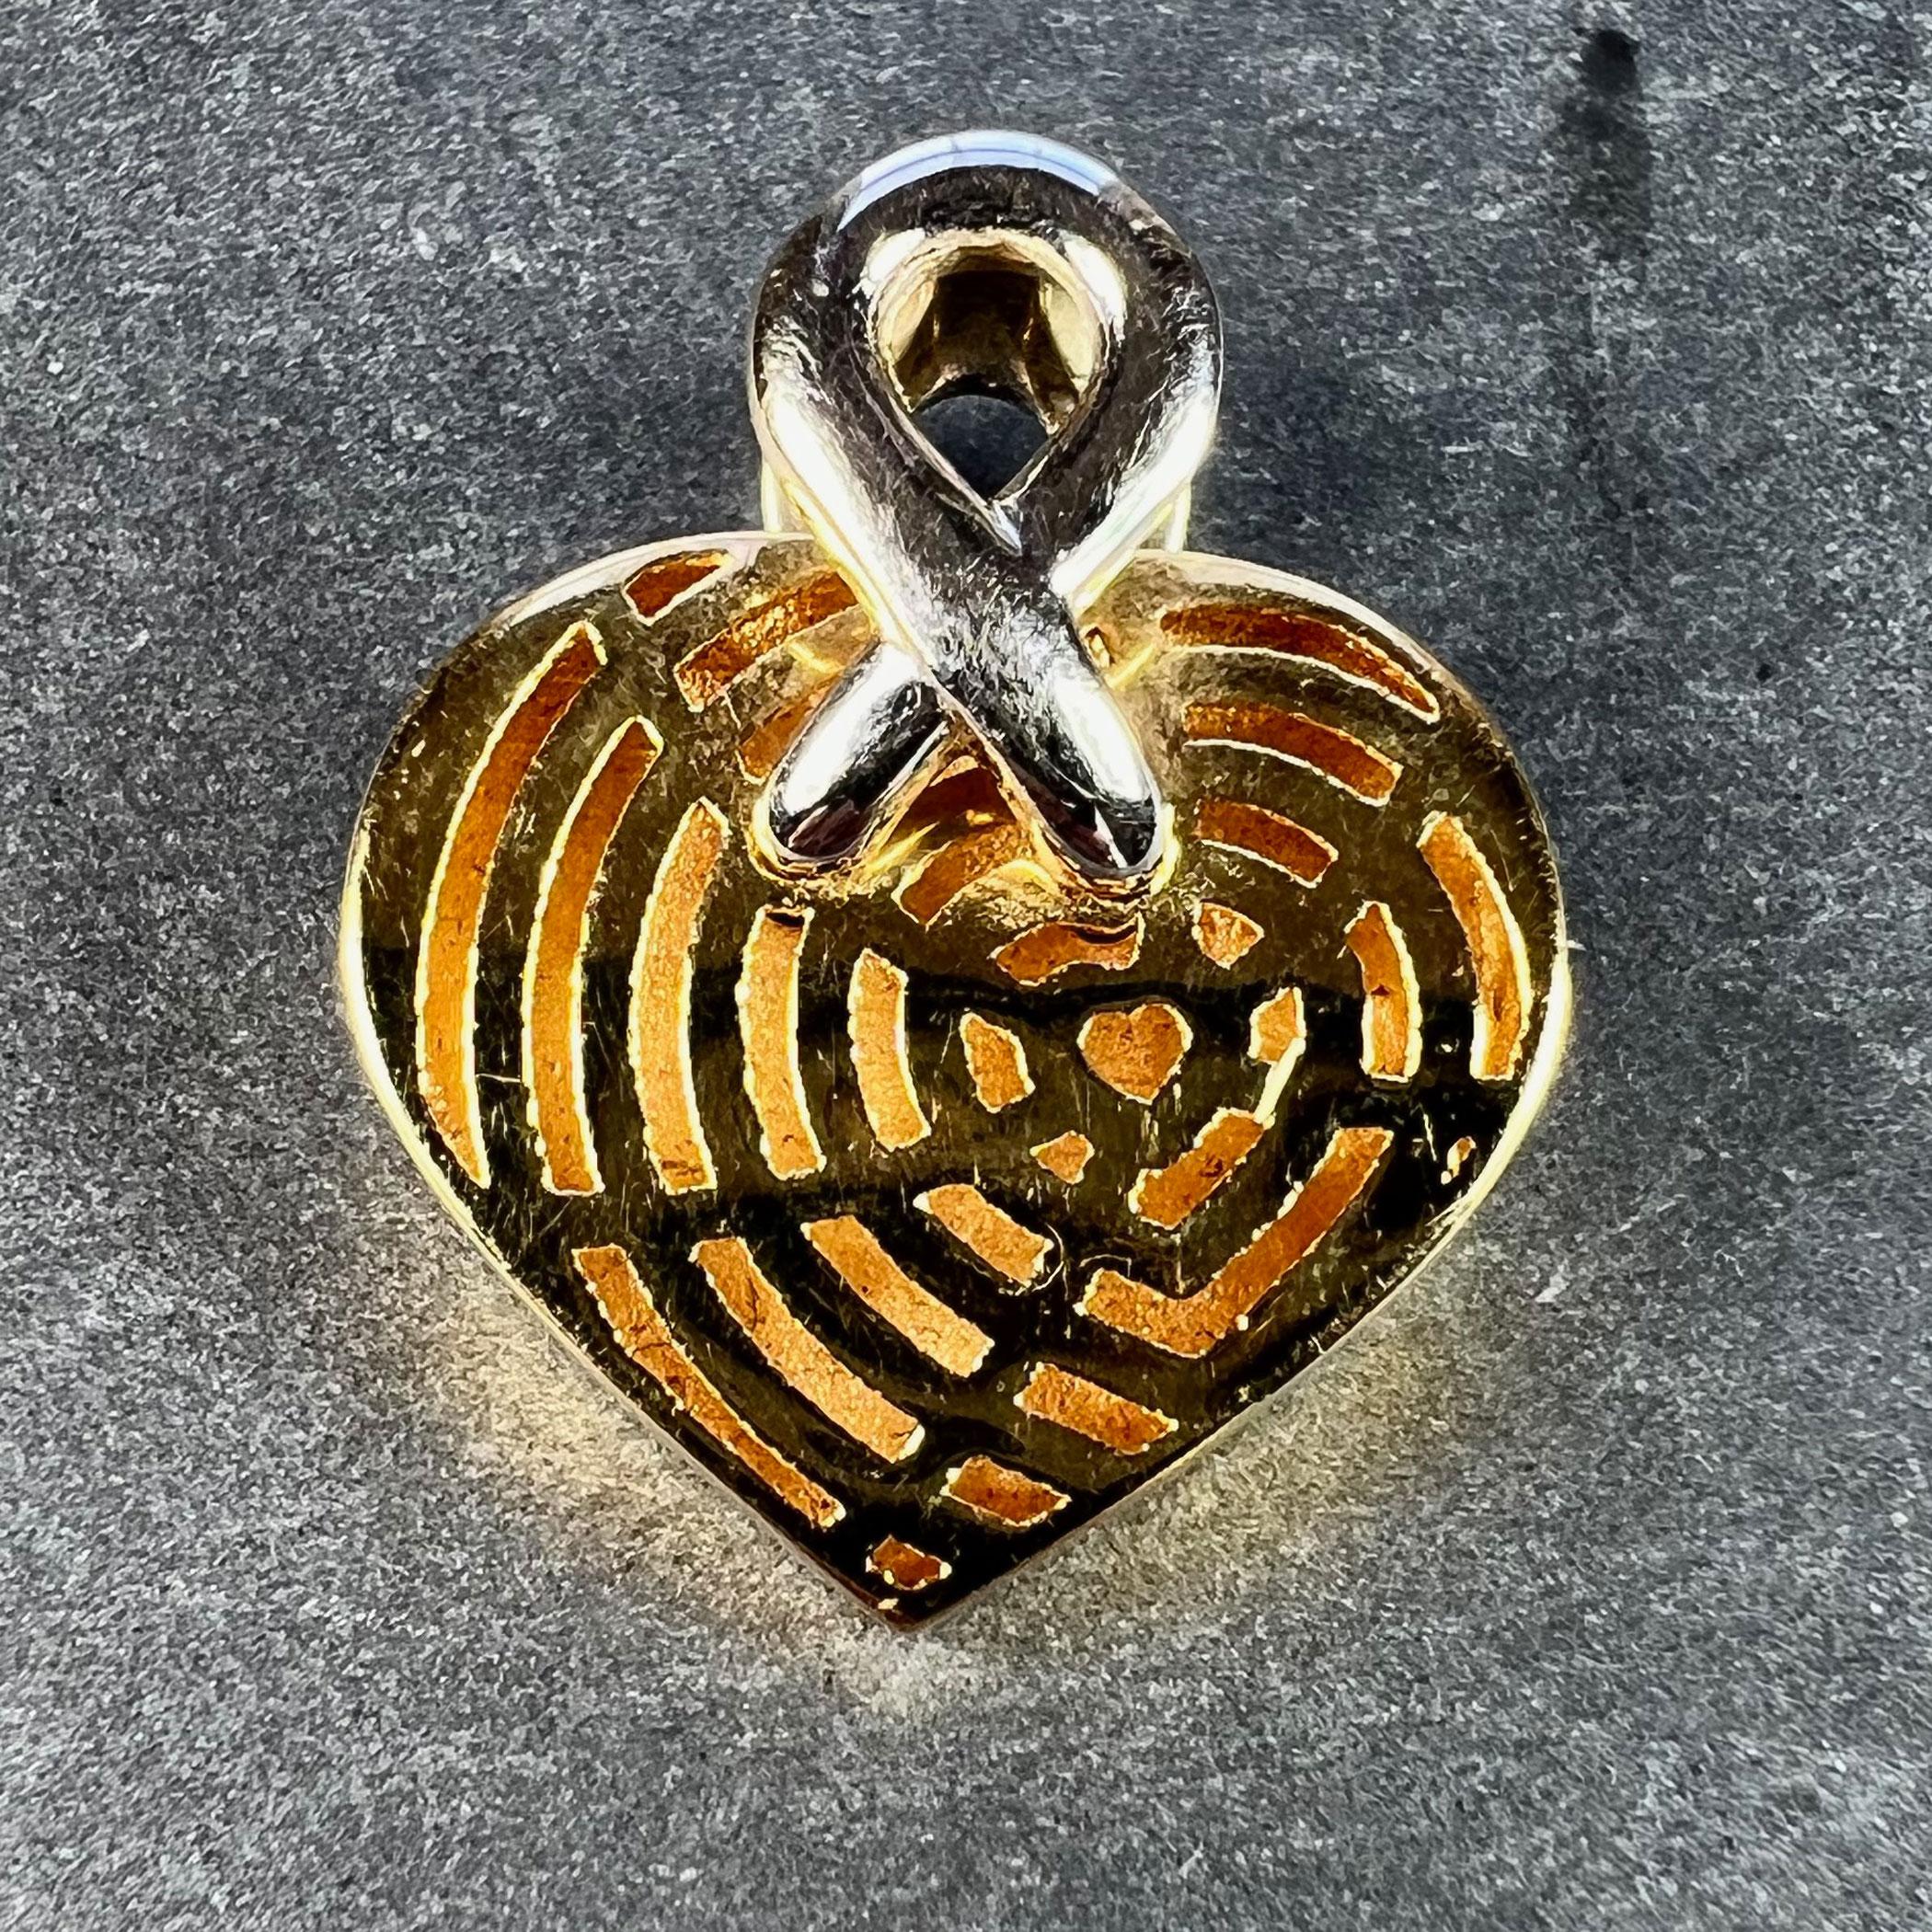 A French 18 karat (18K) yellow gold pendant designed as a three-dimensional love heart, the front of which is pierced to represent a spider's web of radiating hearts. The pendant bail is a white gold twist attached to both sides. Stamped with the